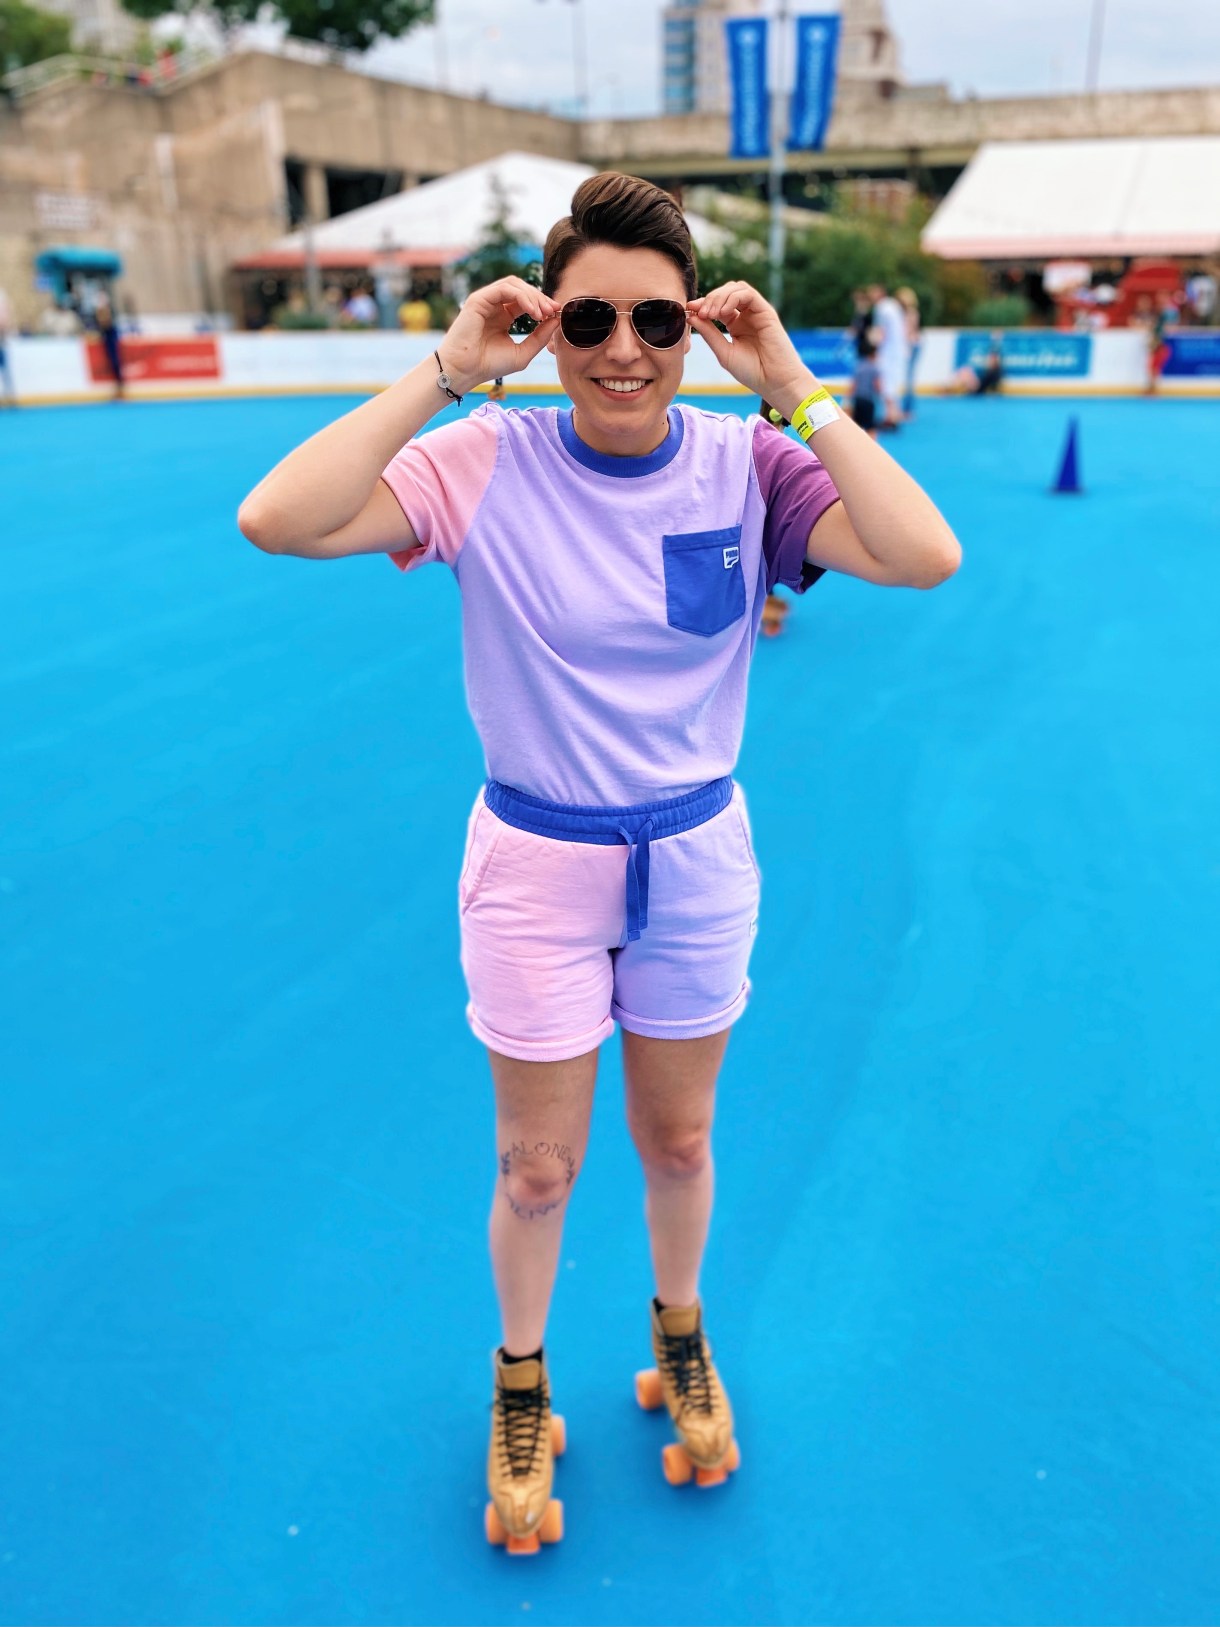 Jackie in rollerskates and sunglasses